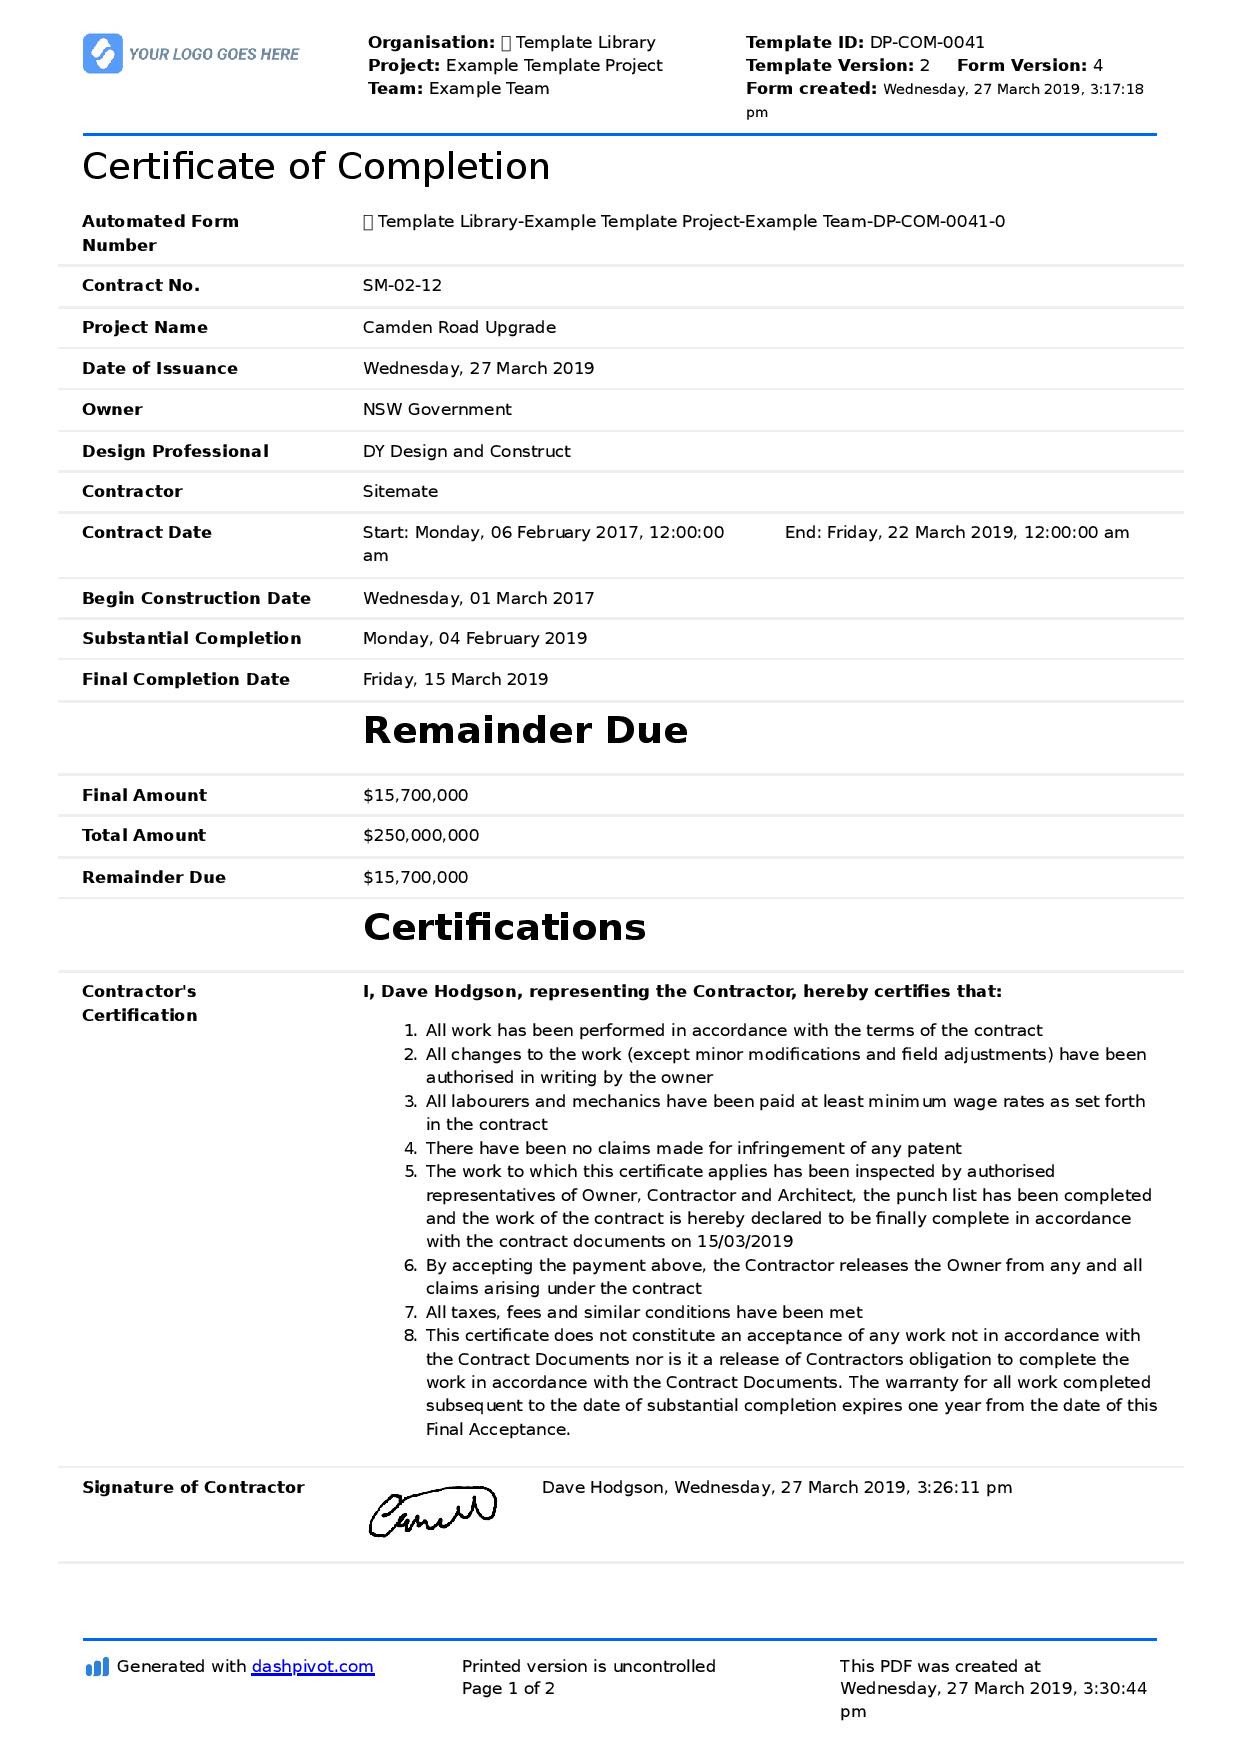 Certificate of pletion for Construction Free template